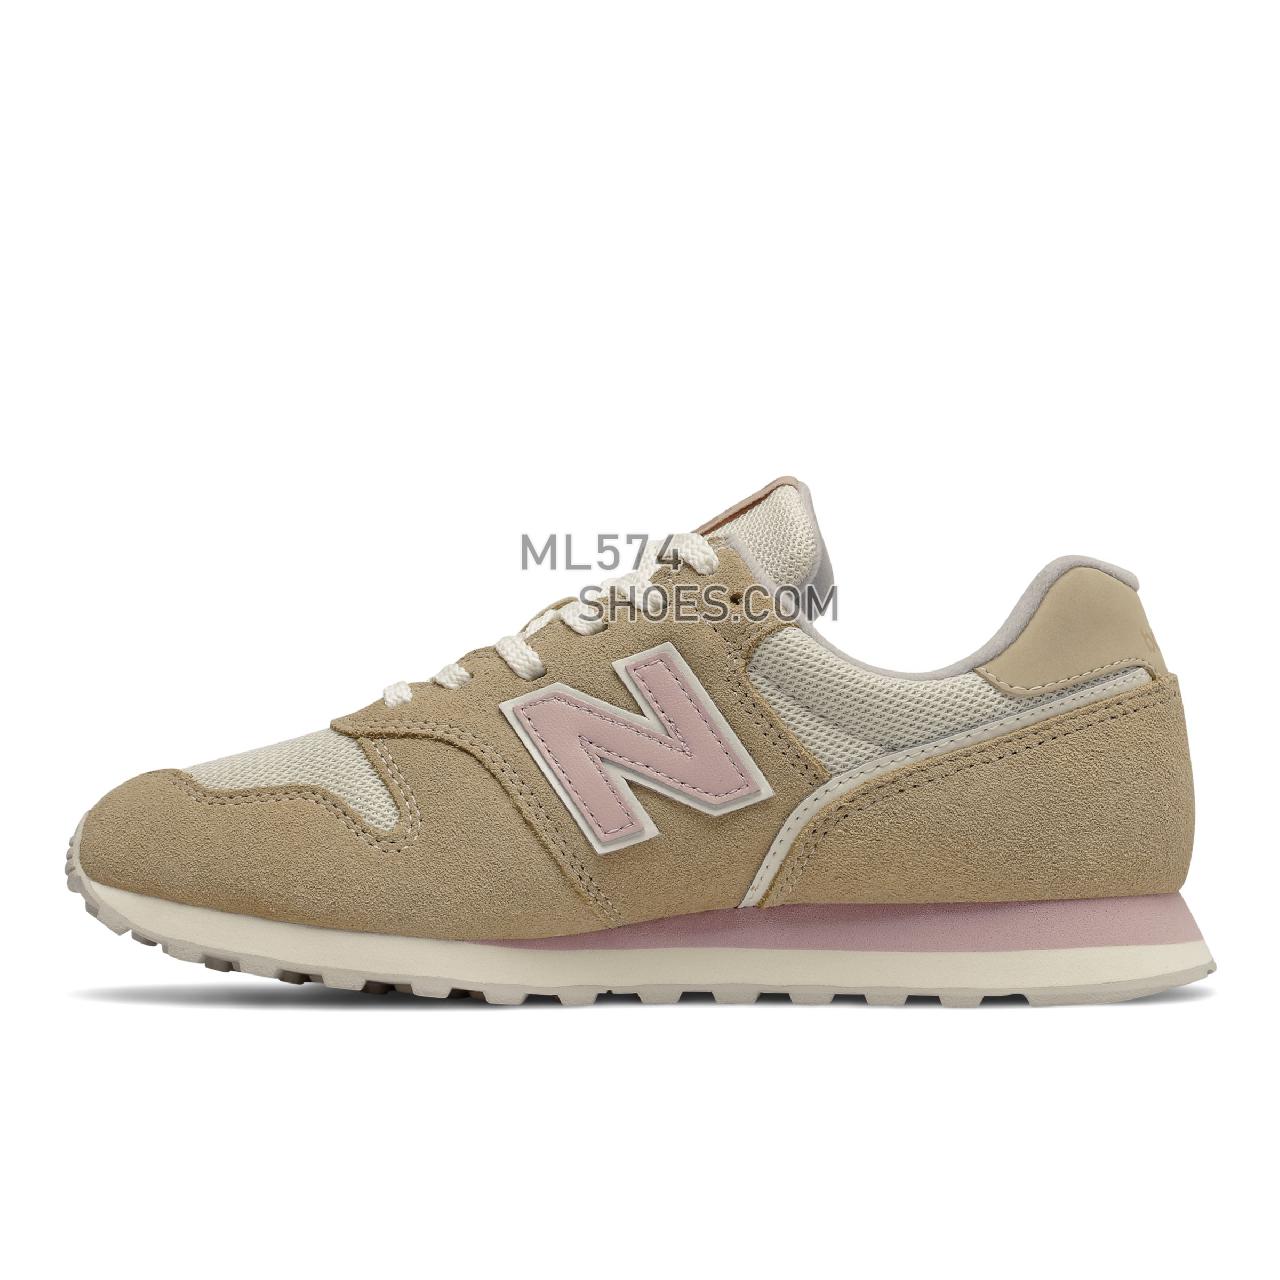 New Balance 373V2 - Women's Classic Sneakers - Incense with Space Pink - WL373EE2